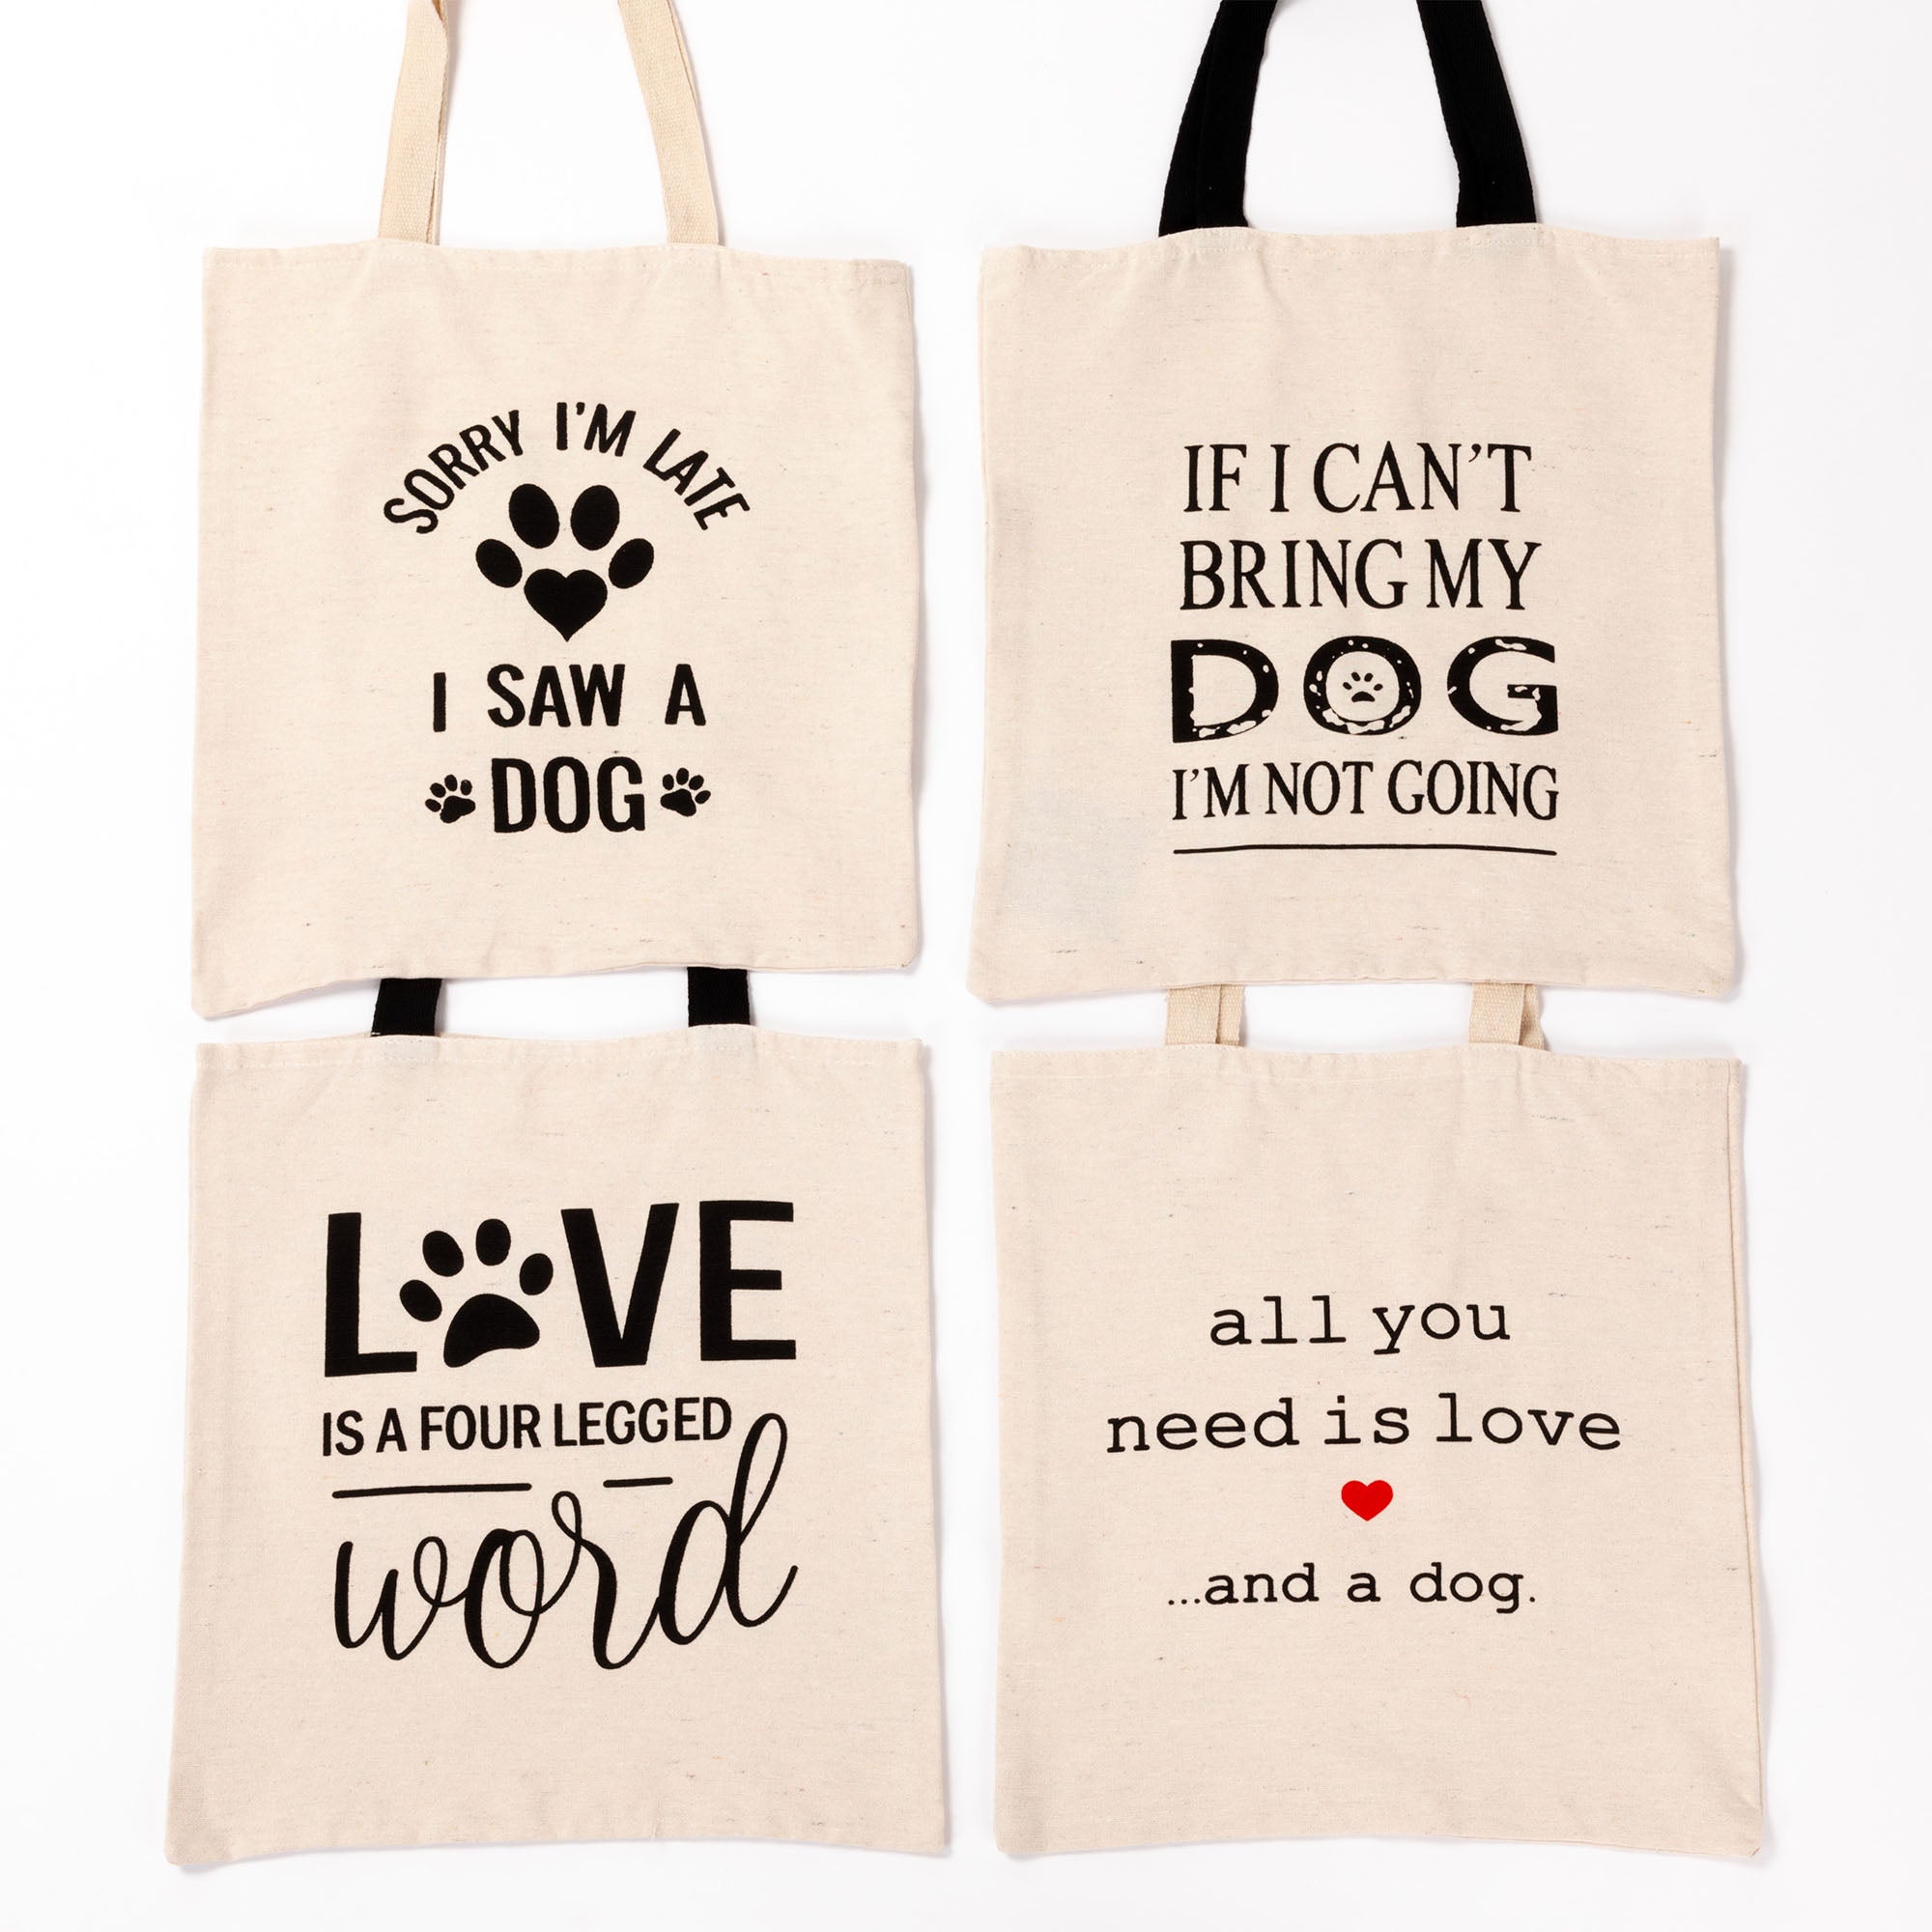 All About Dog Love Tote - Saw A Dog